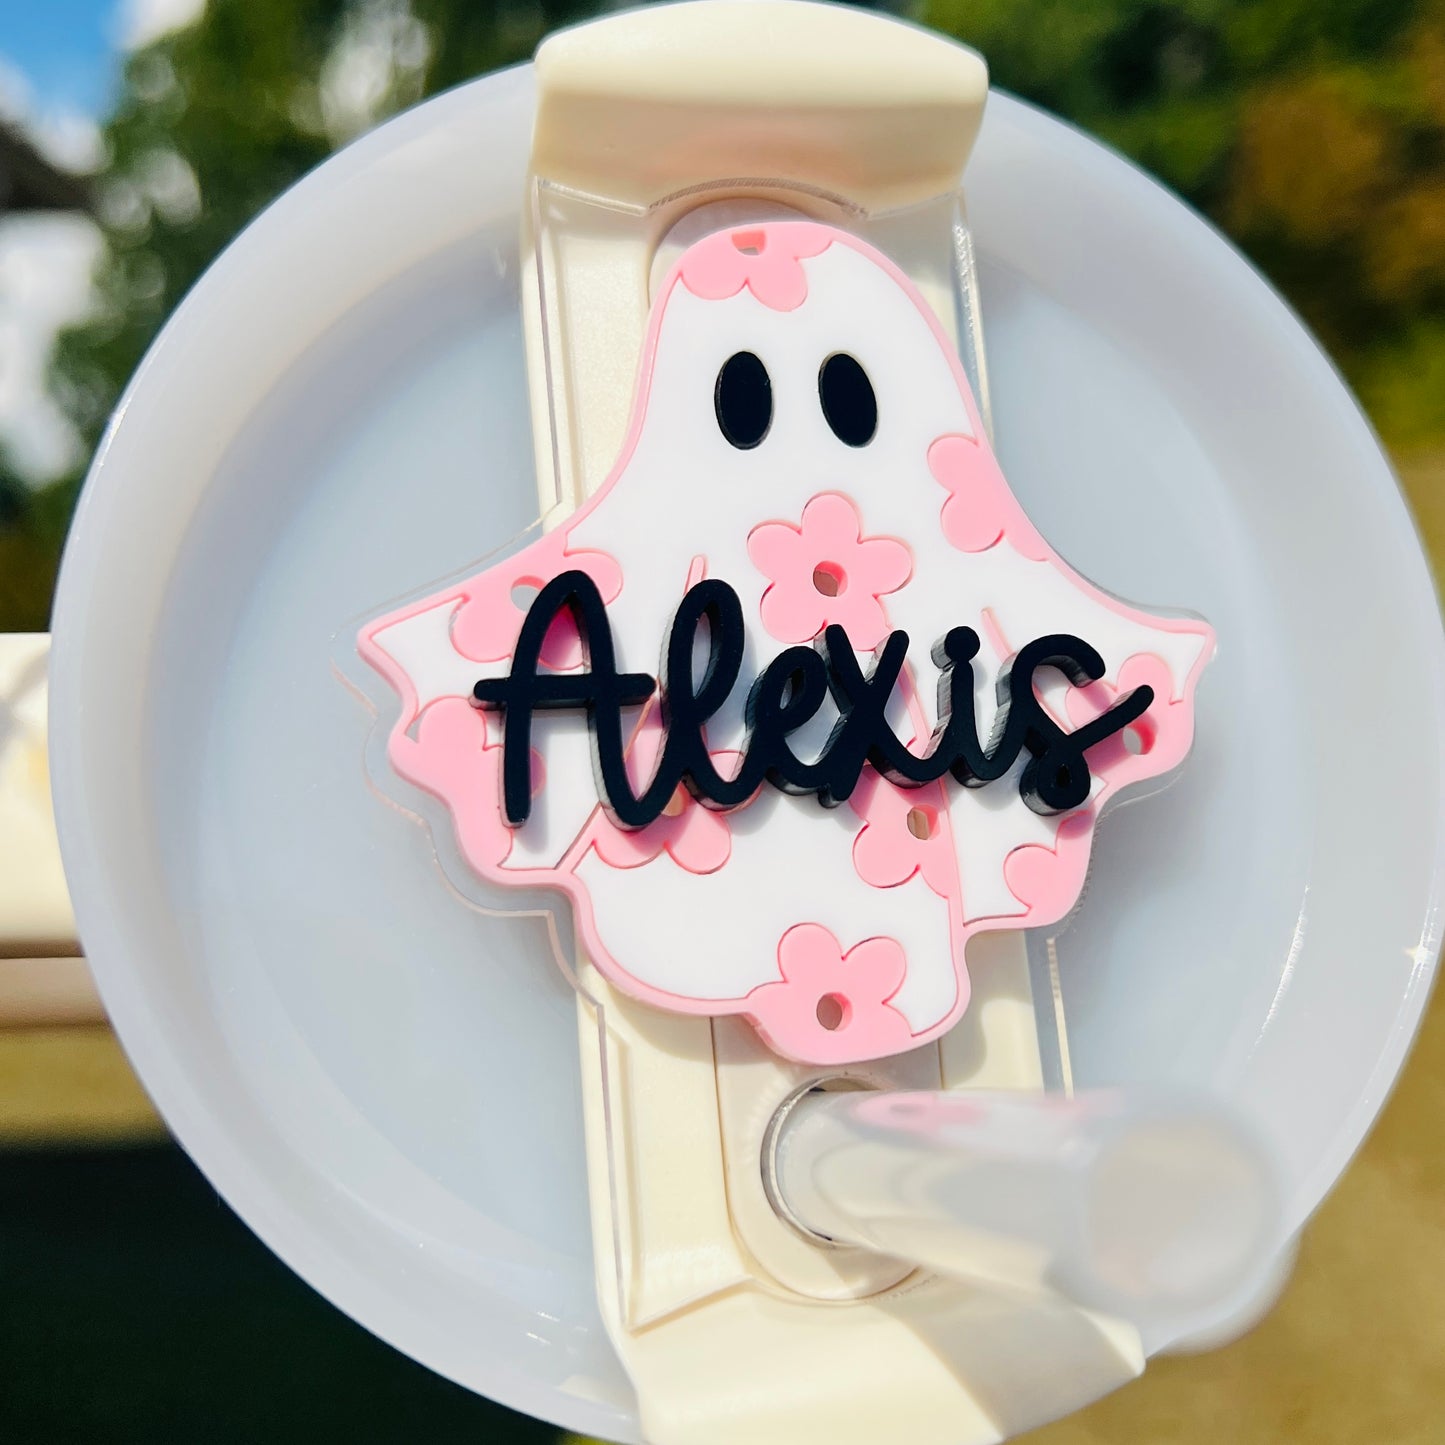 Custom Stanley Name Tags – Hidden Daisies Boutique